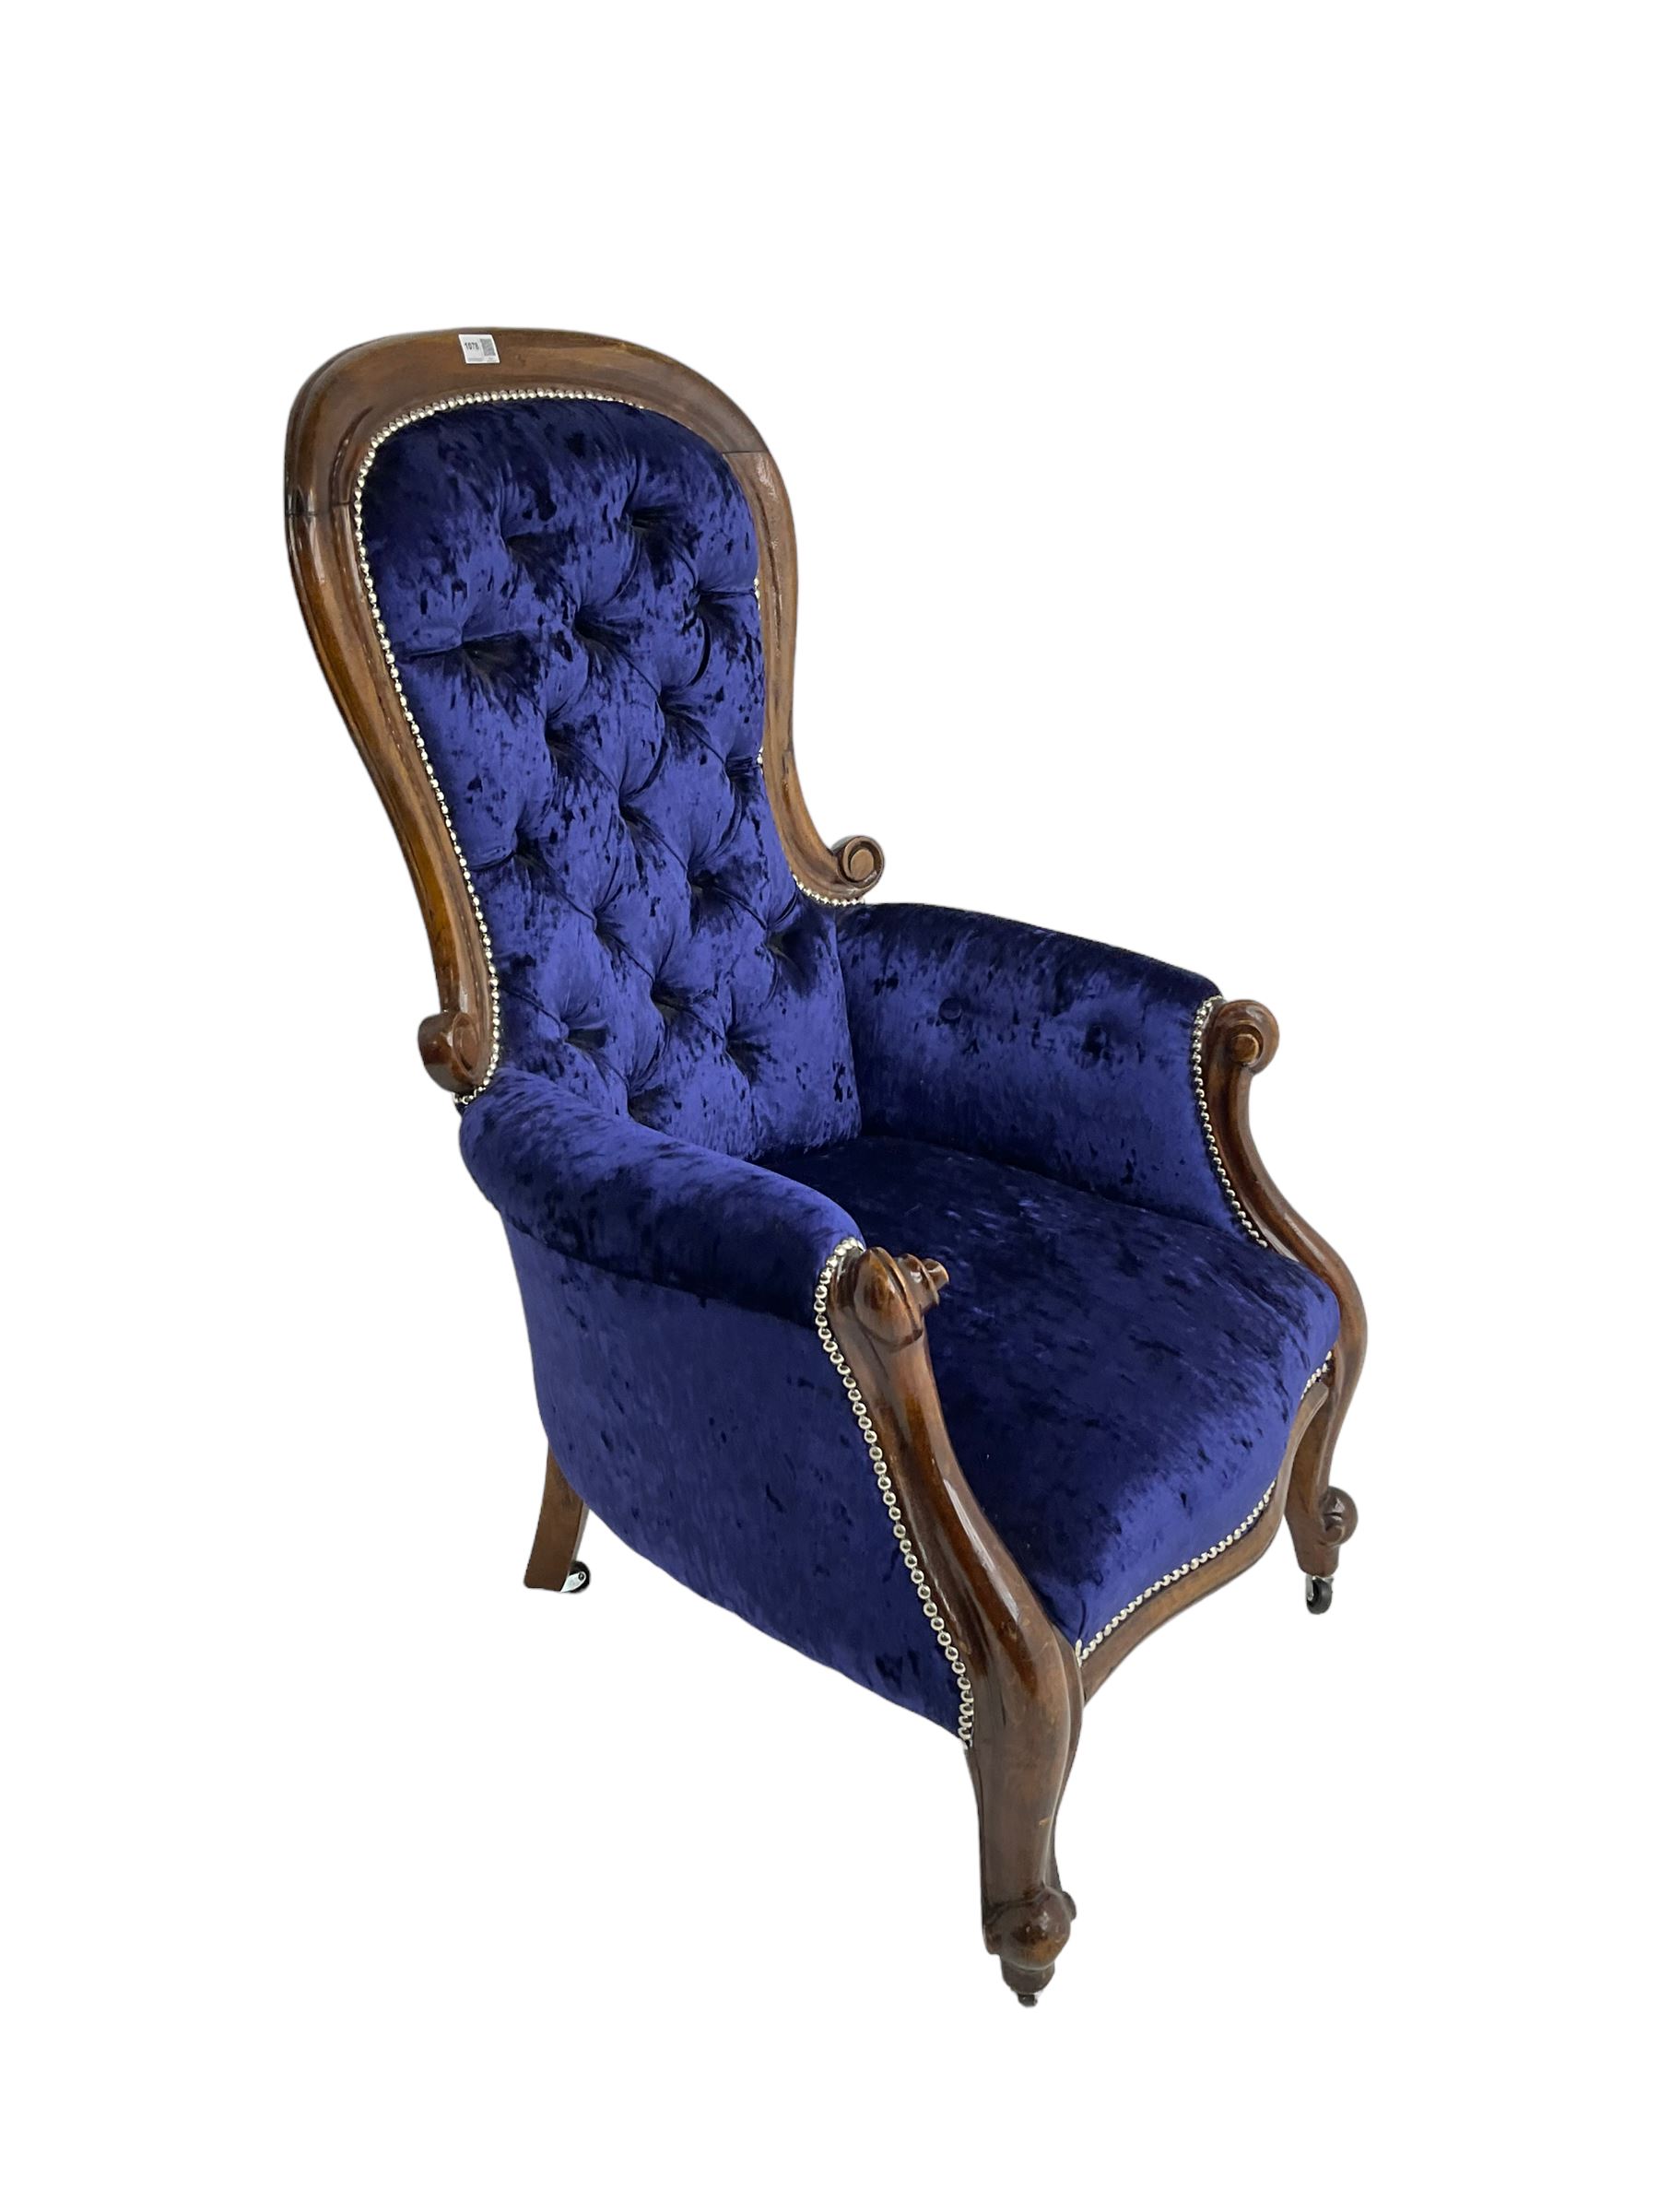 Victorian armchair - Image 4 of 6